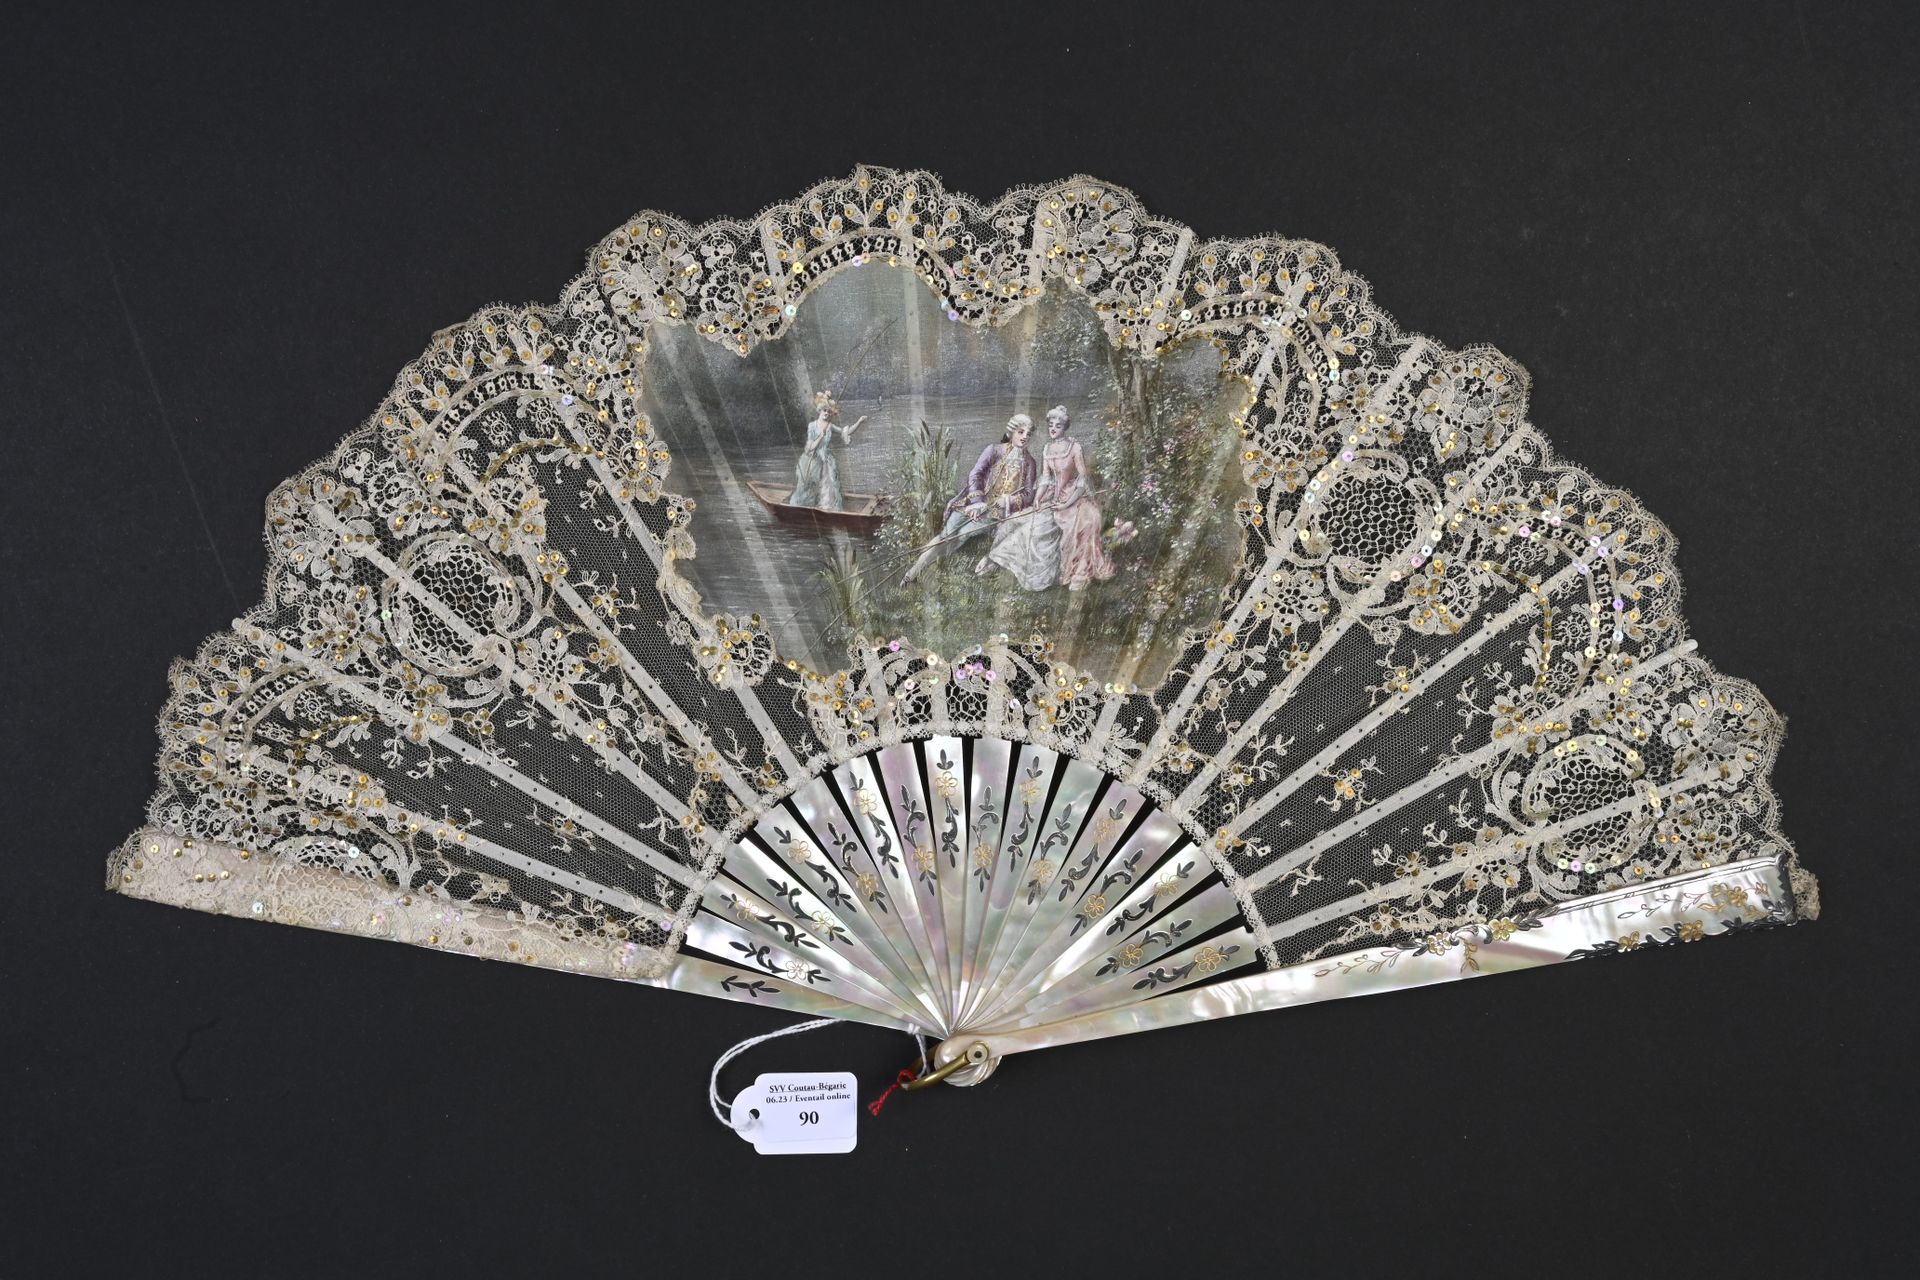 Null By the Pond, Europe, circa 1900
Folded fan, the lace leaf enhanced with gol&hellip;